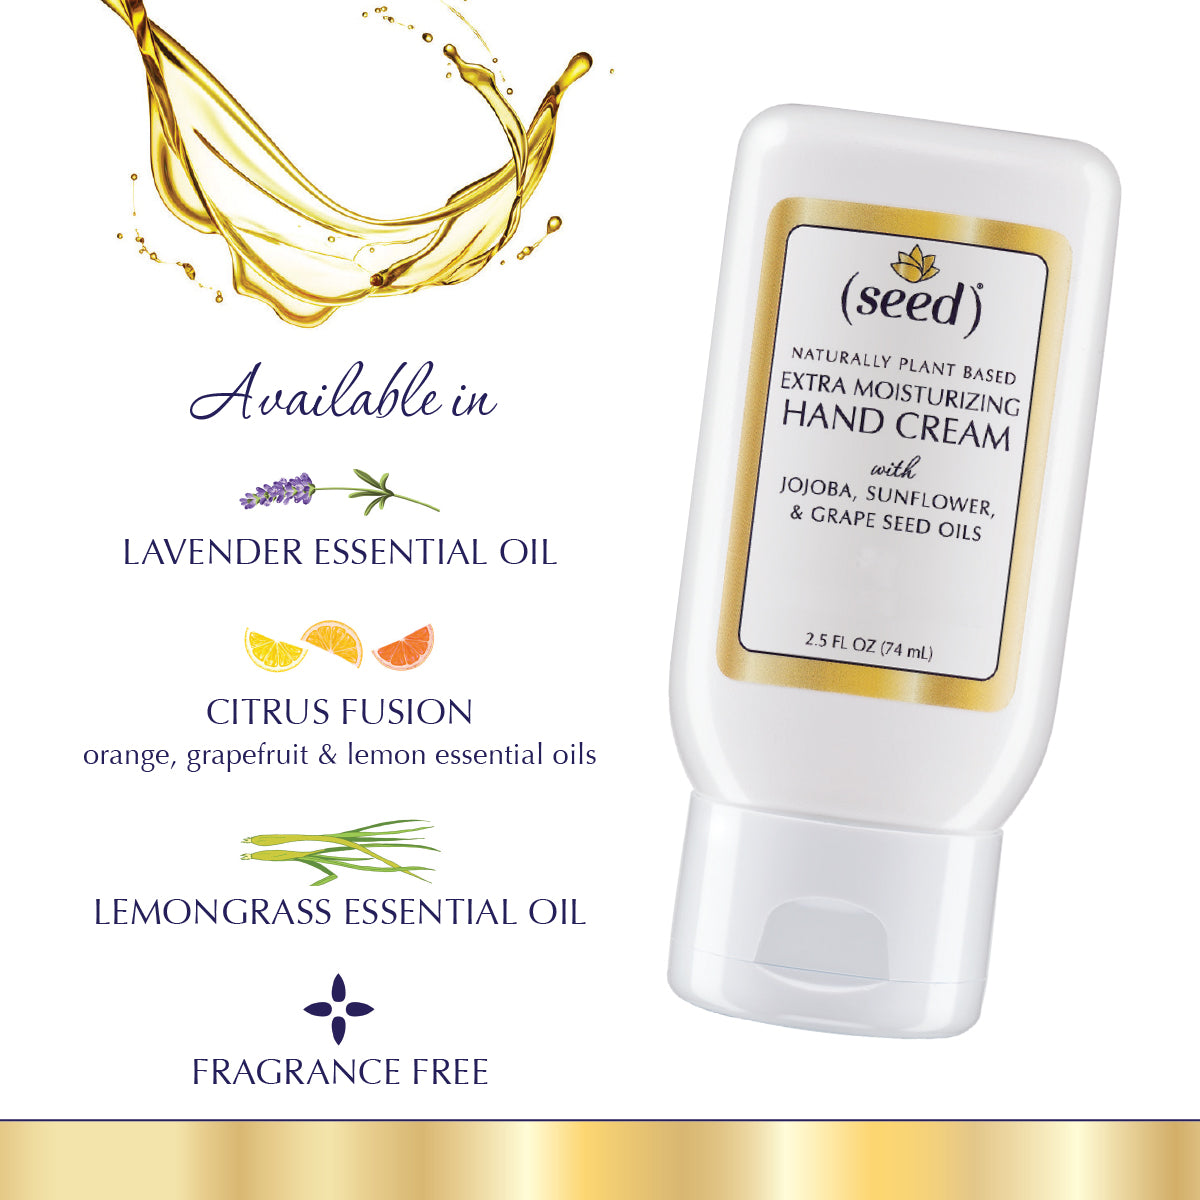 Seed Extra Moisturizing Hand Cream in Fragrance Free, Lavender, Lemongrass or Citrus Fusion